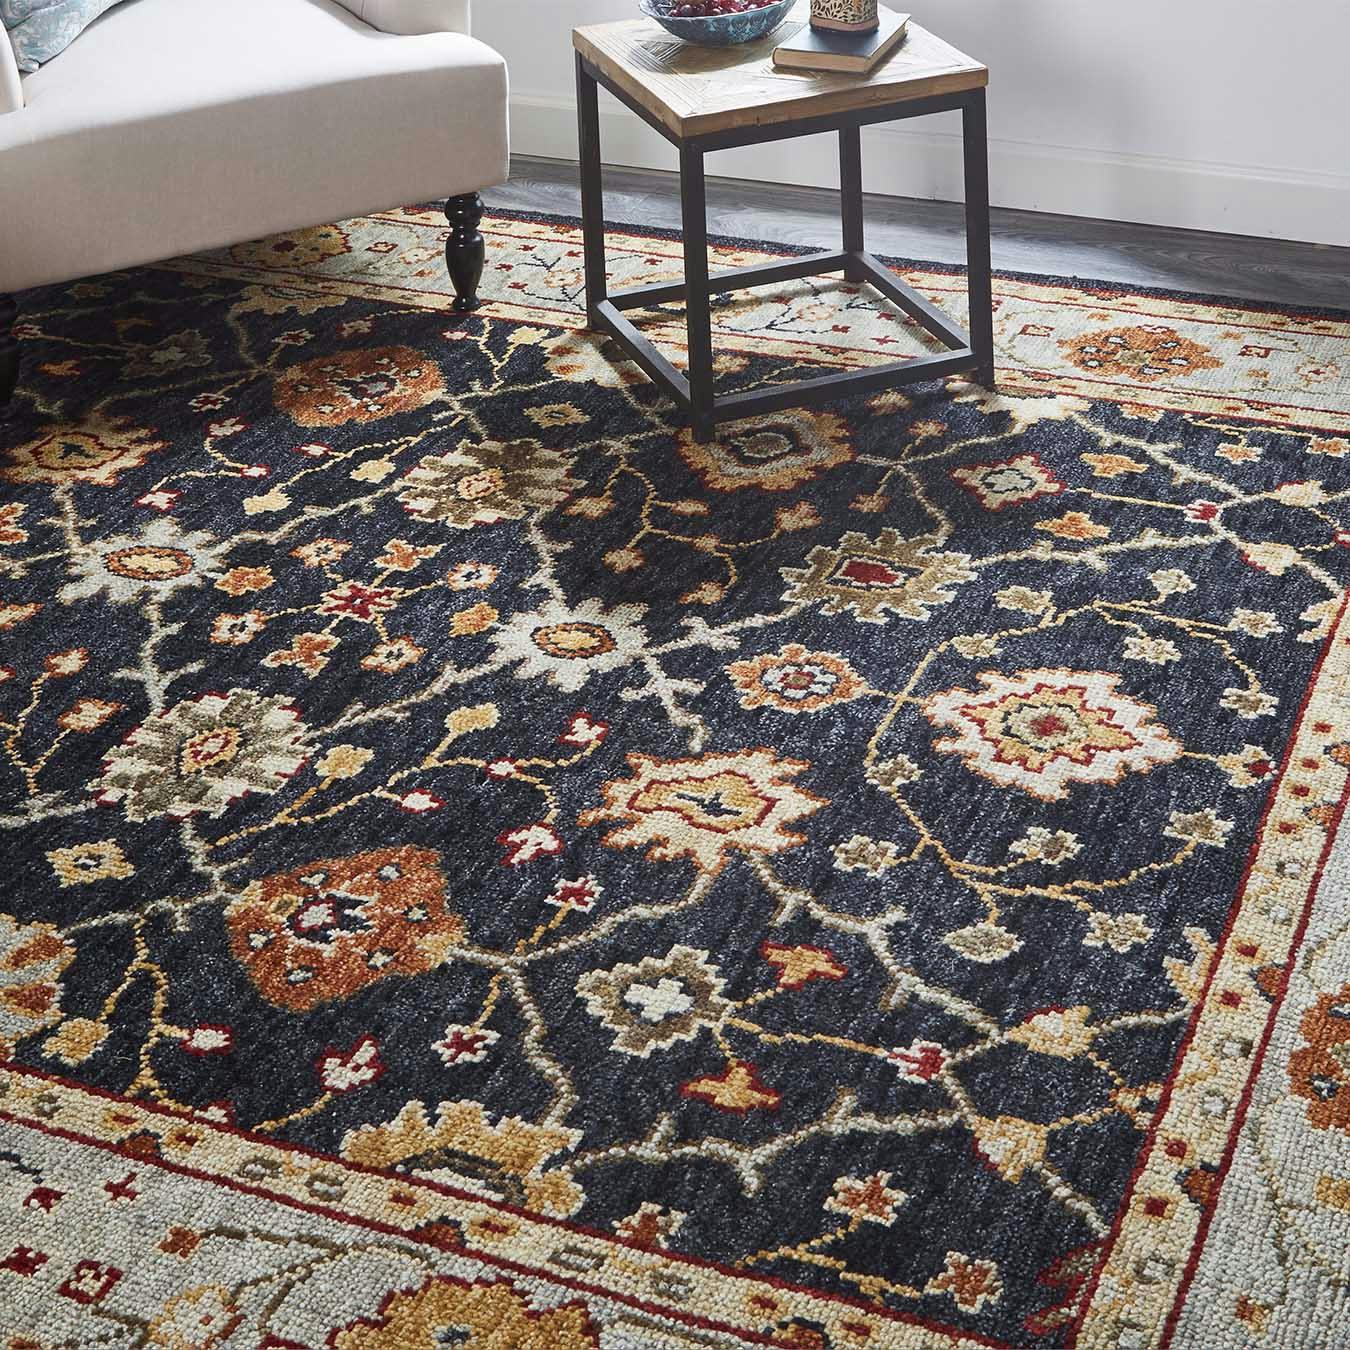 Feizy Rugs Carrington Traditional Oushak Area Rug Geo Floral 8ft-6in x 11ft-6in Black/Gold 